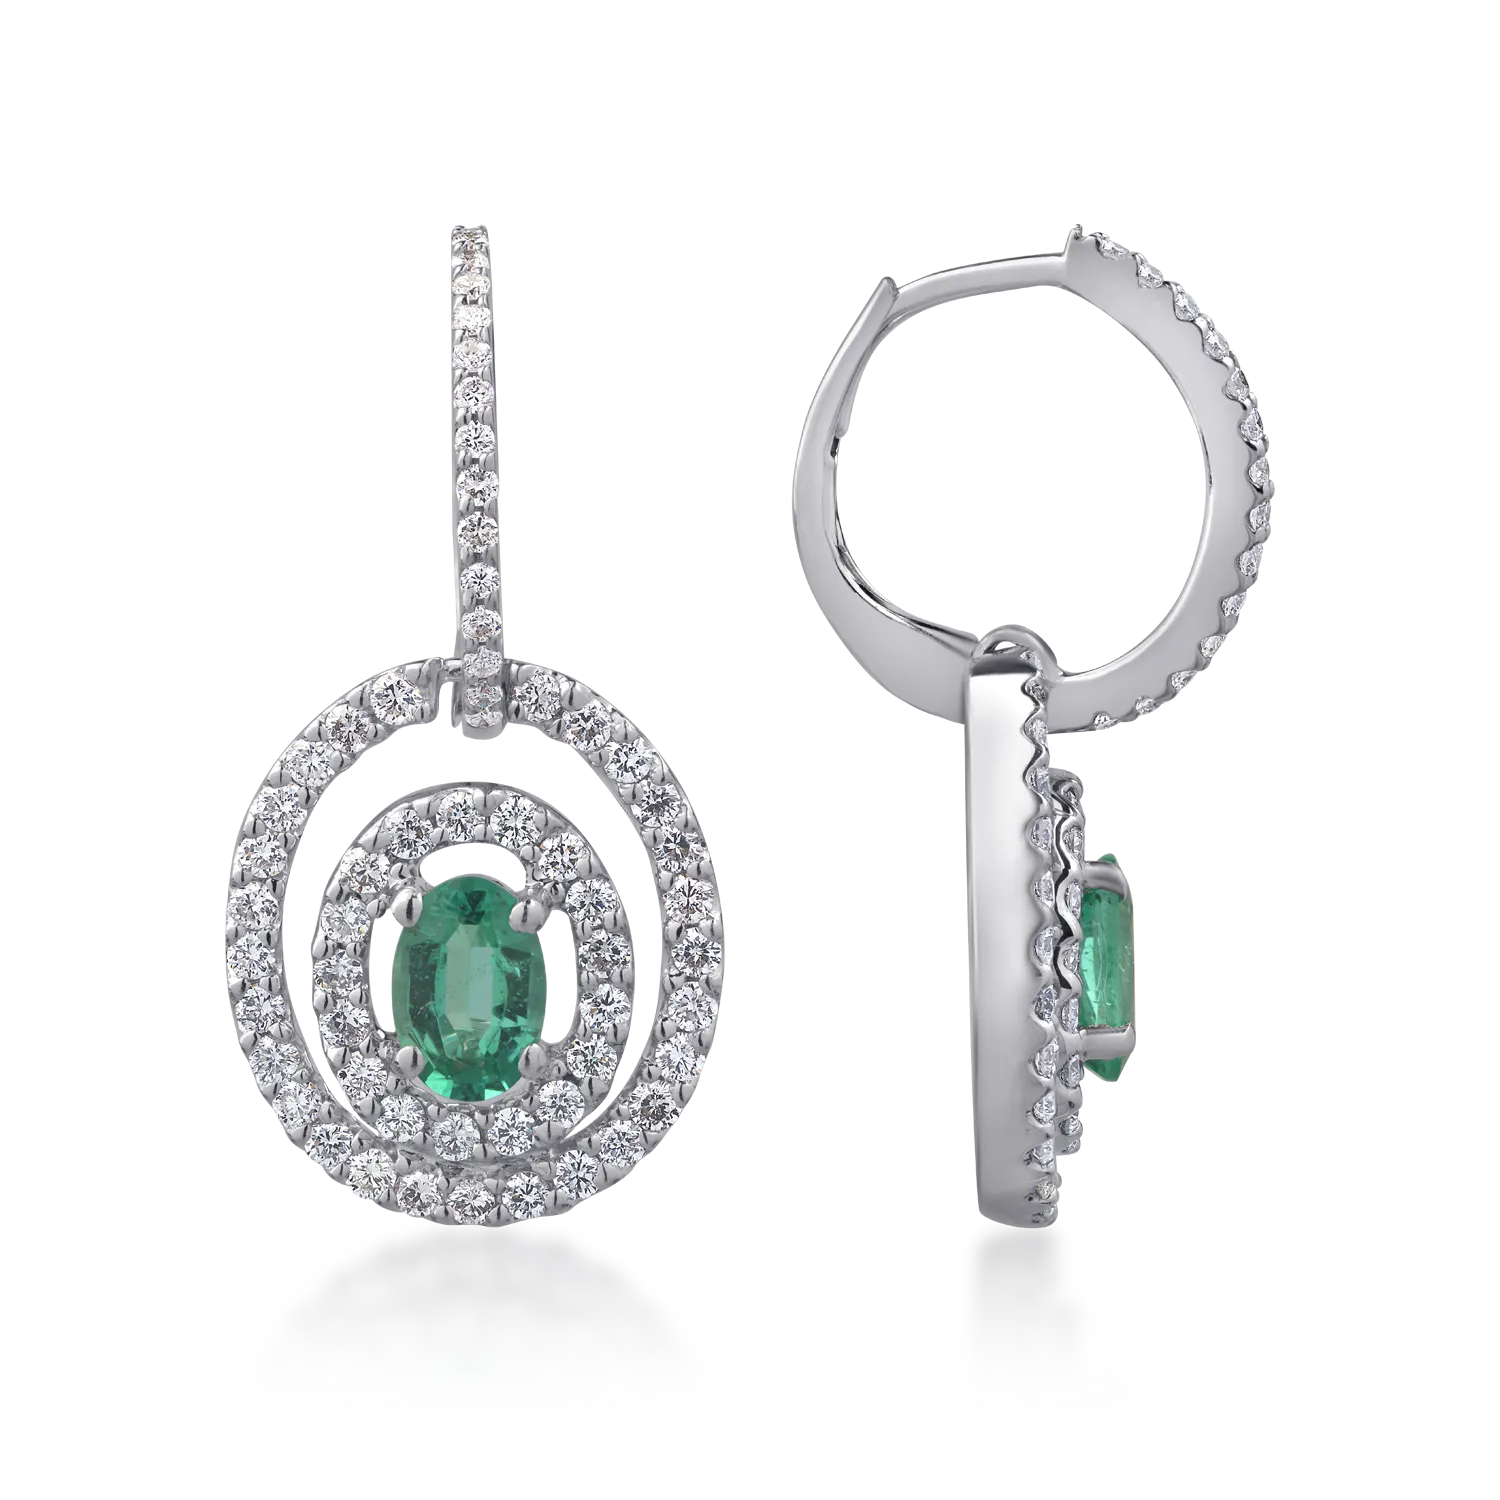 18K white gold earrings with 0.84ct emeralds and 1.04ct diamonds